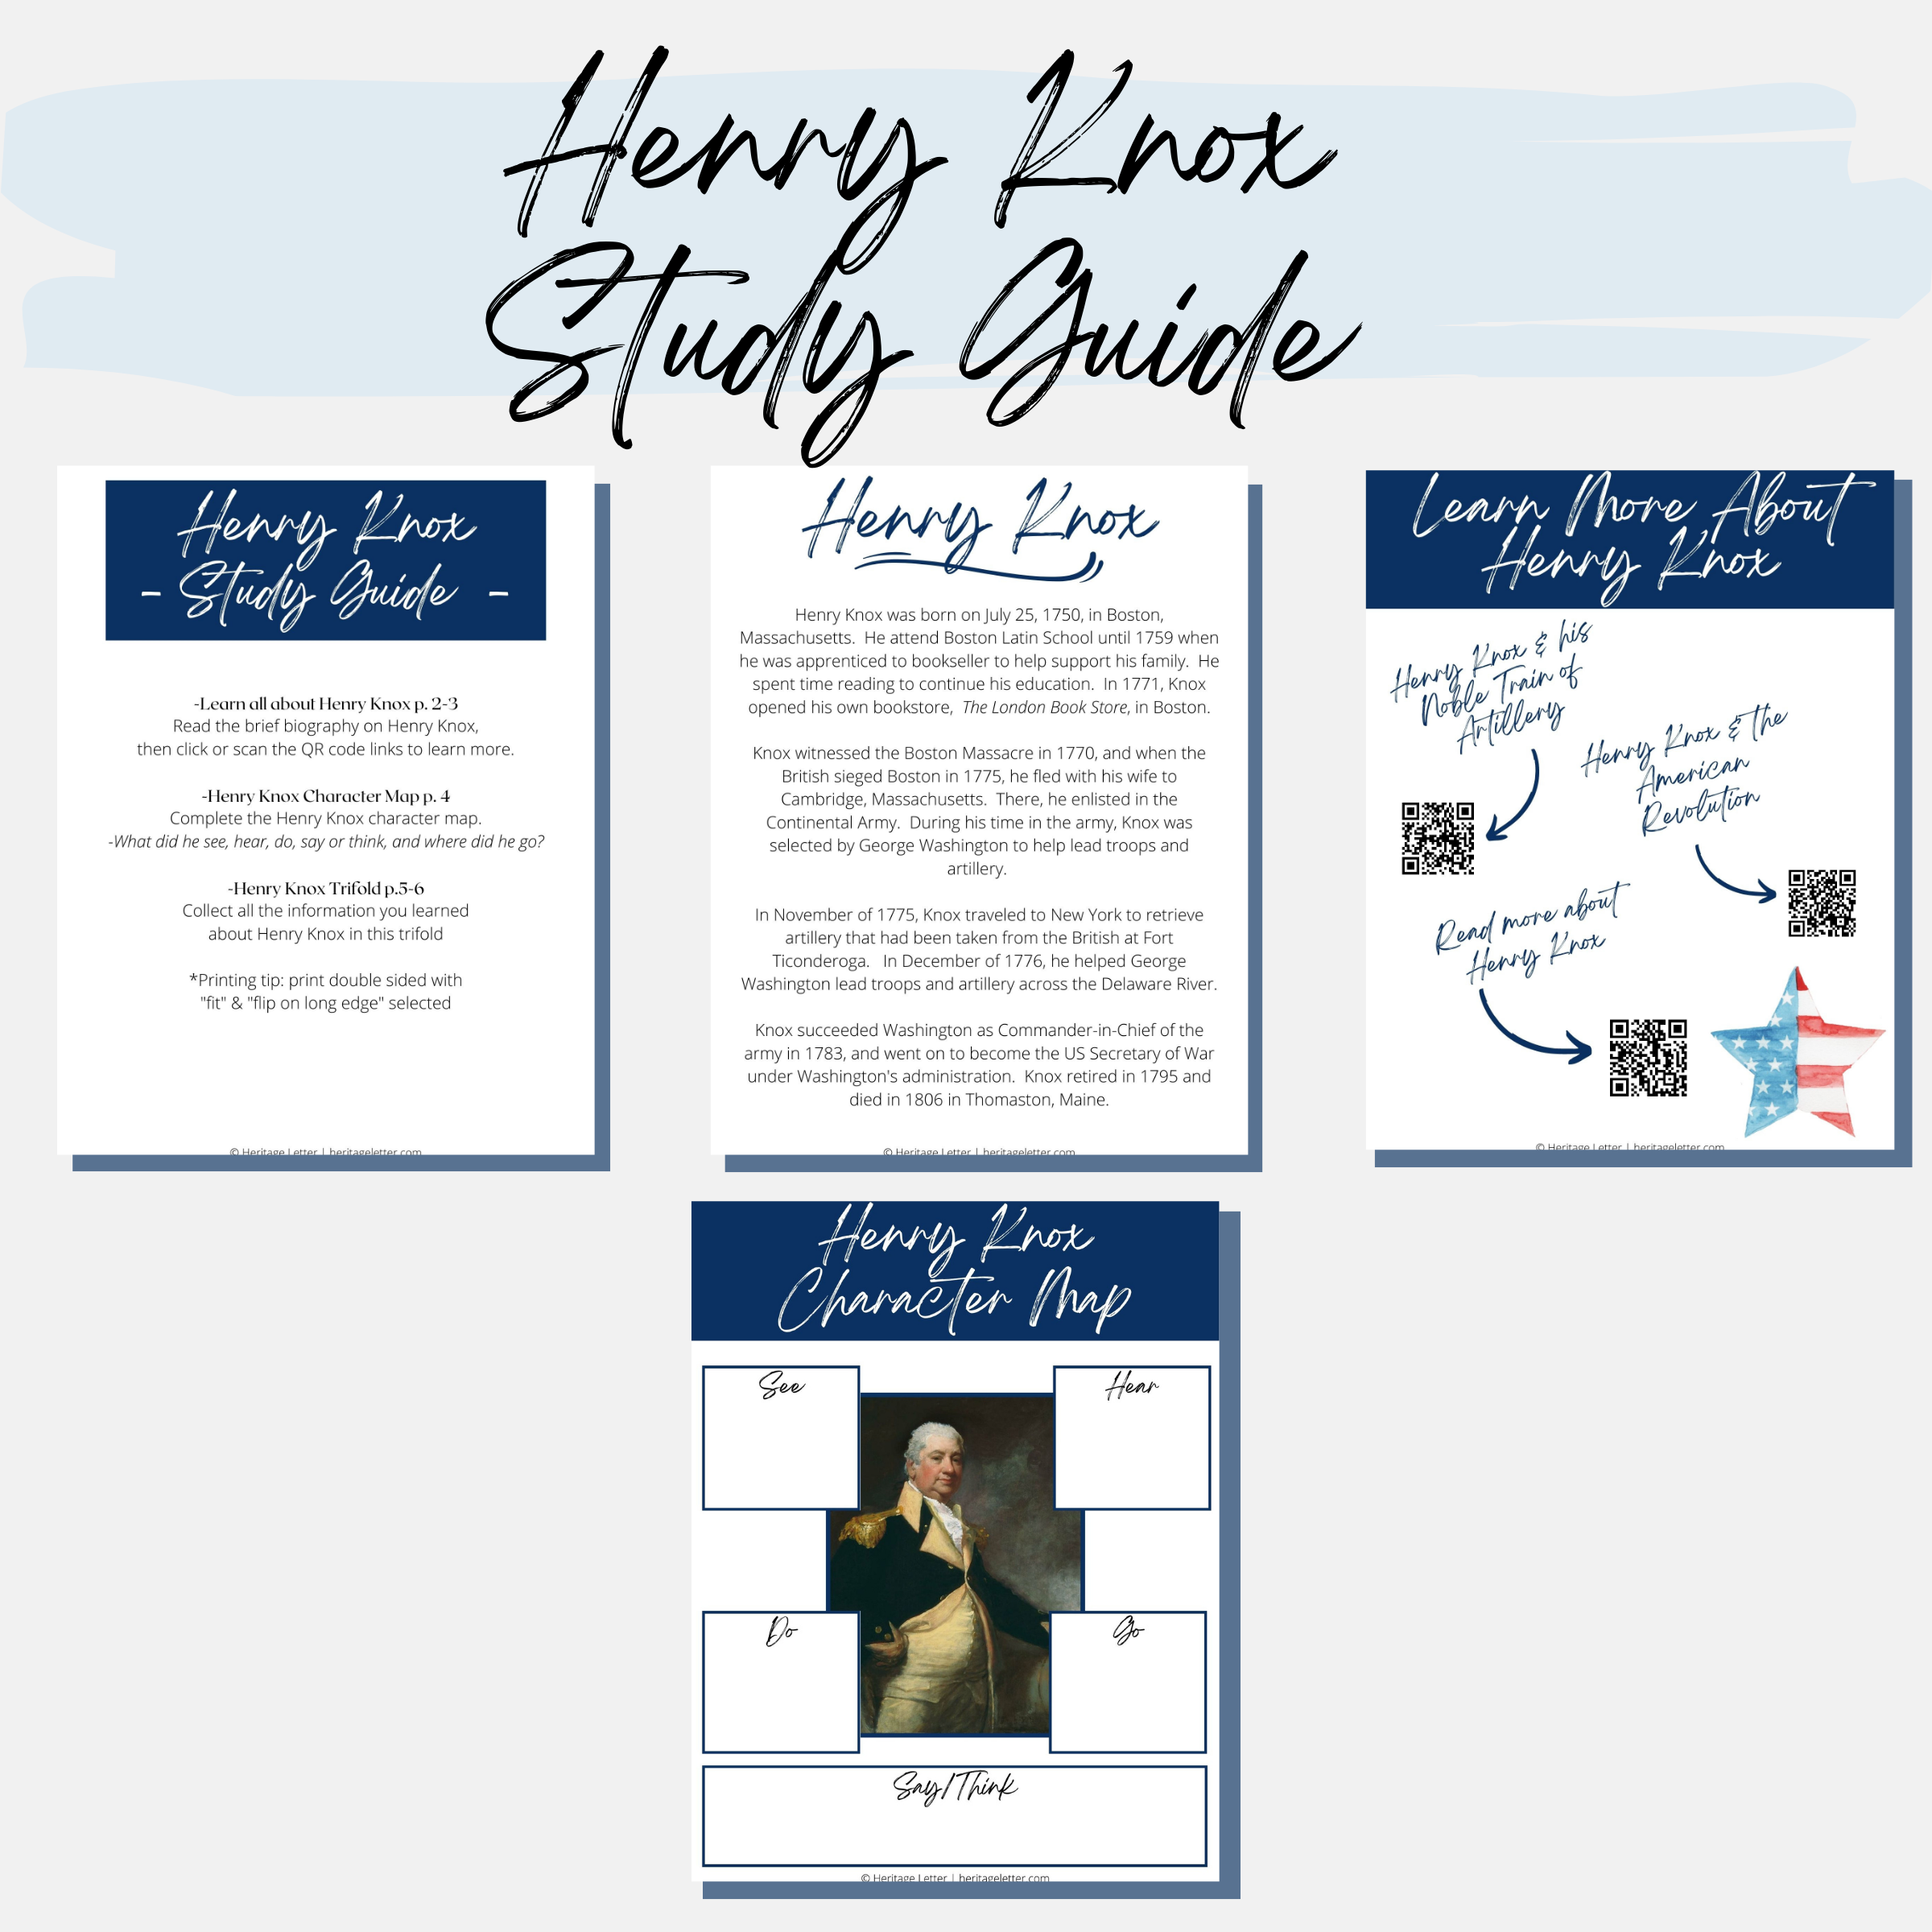 Henry Knox Study Guide